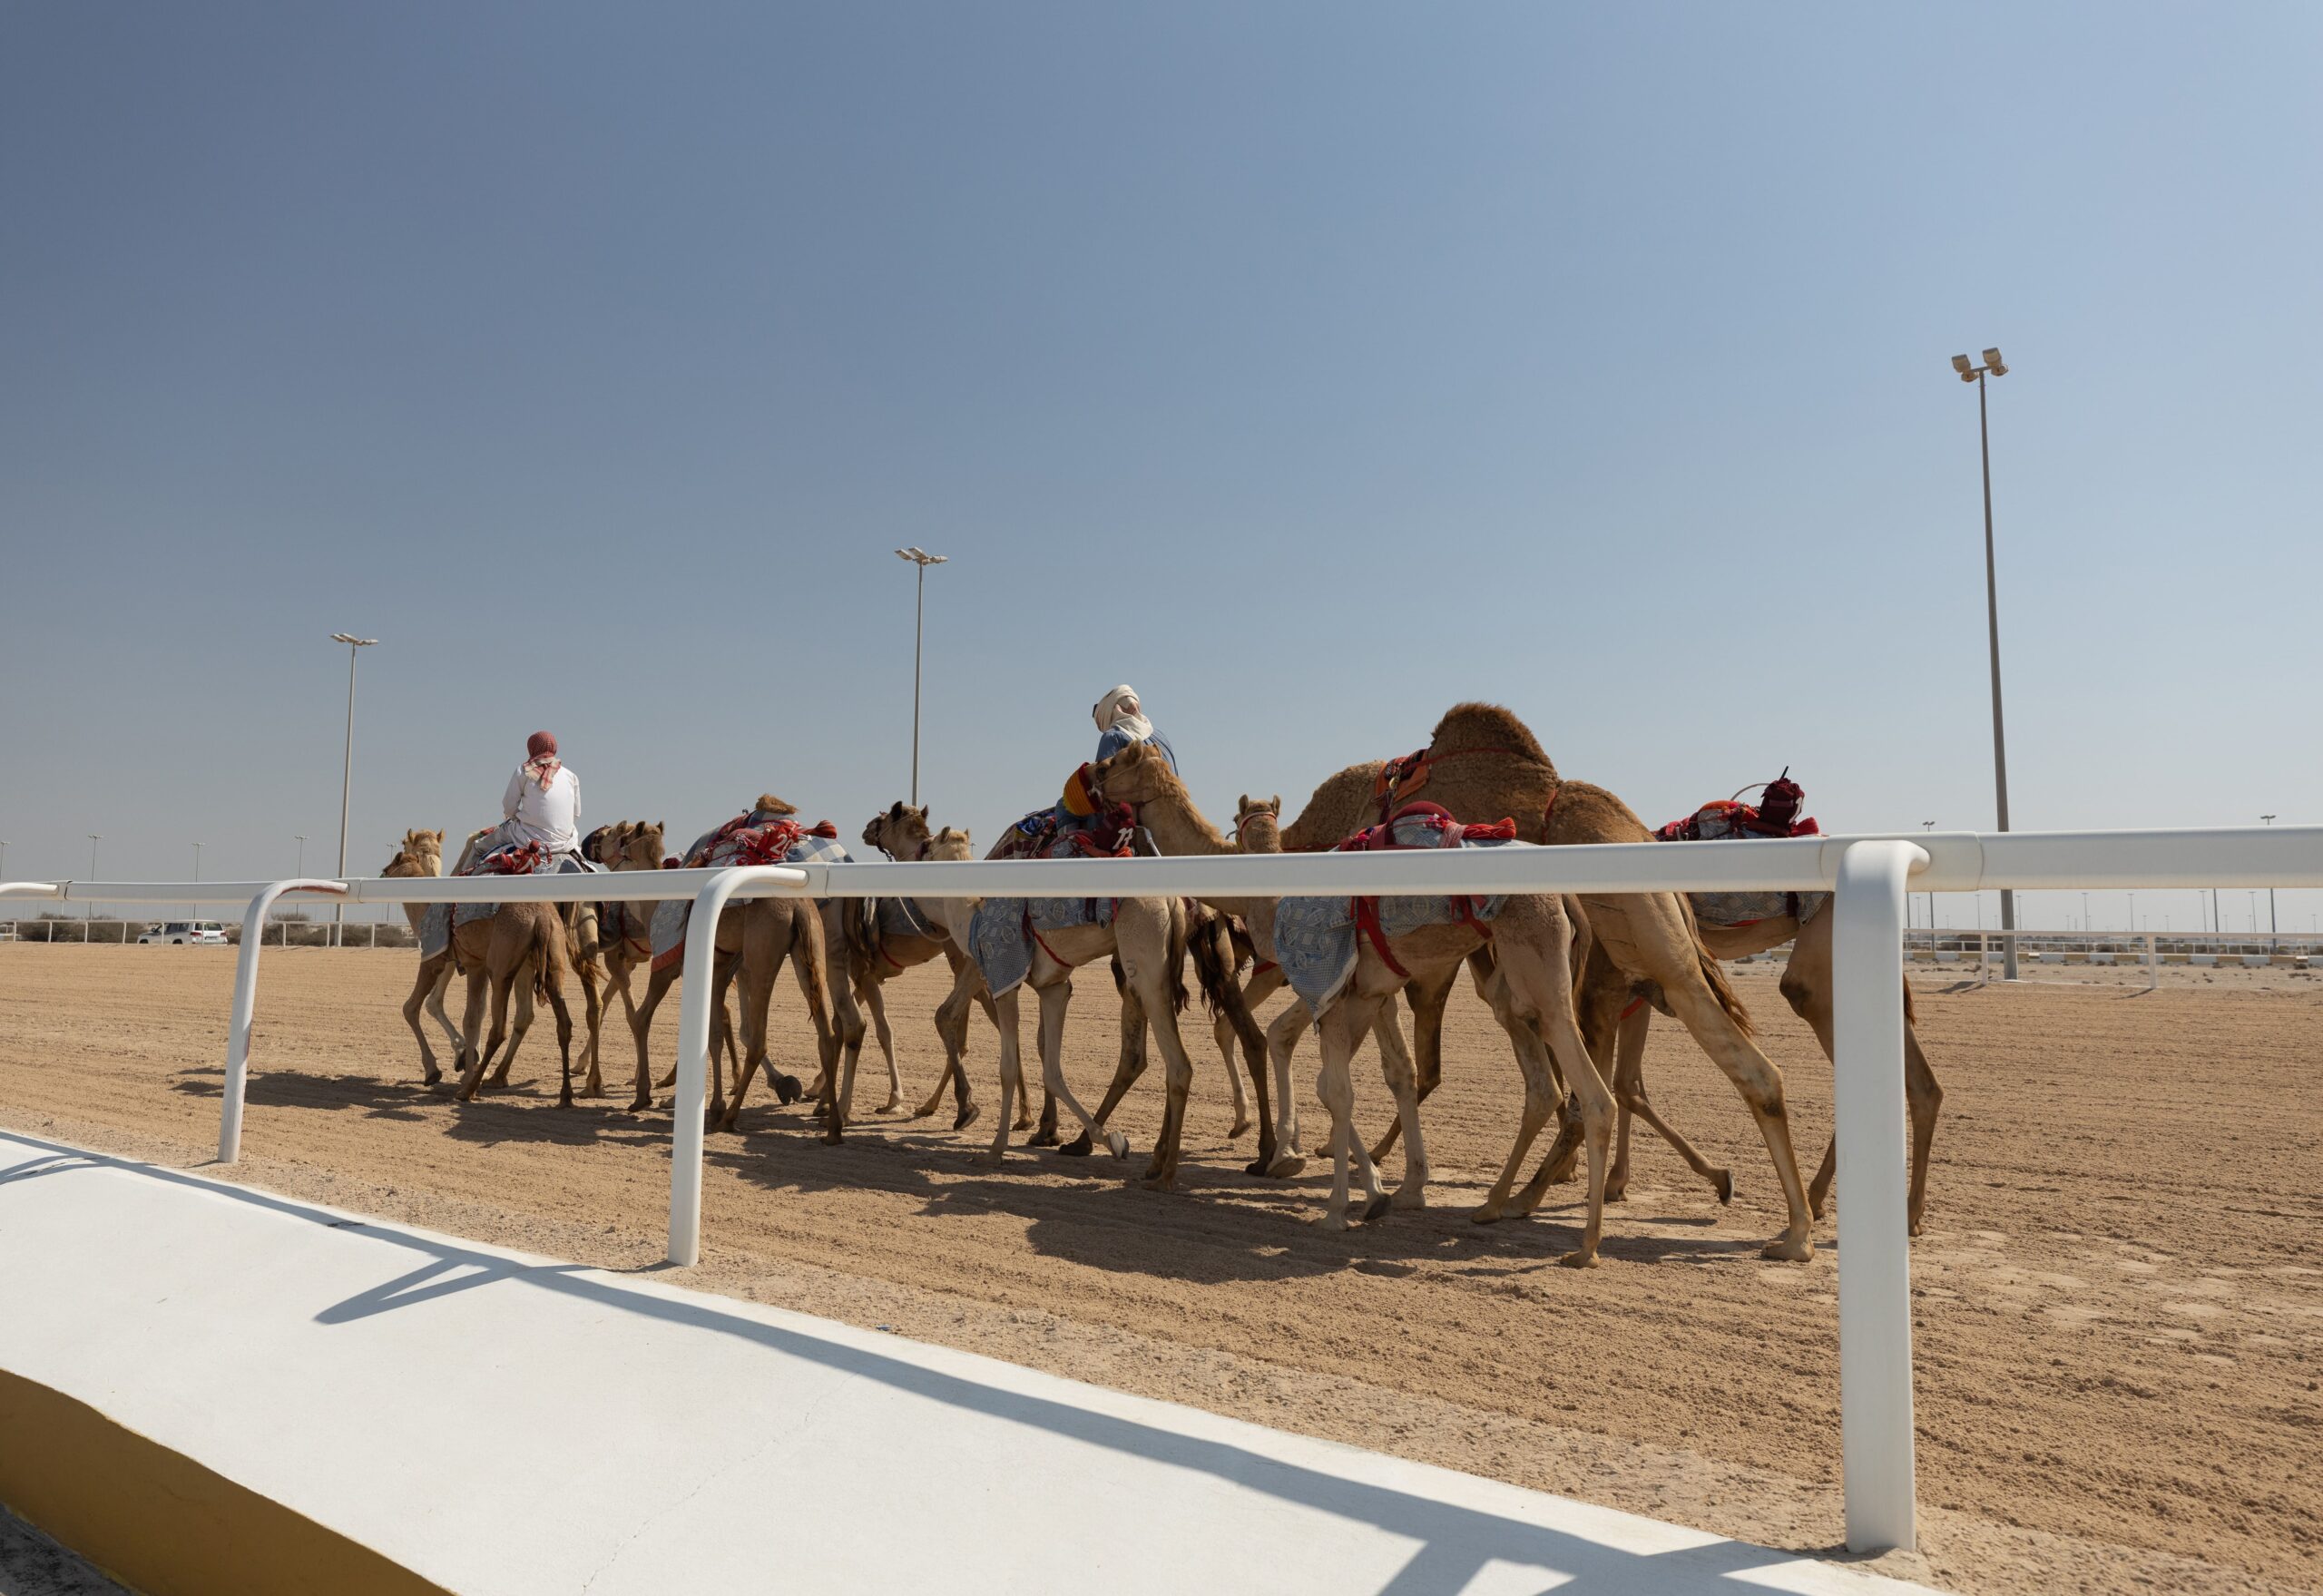 What Do You Wear To Camel races?